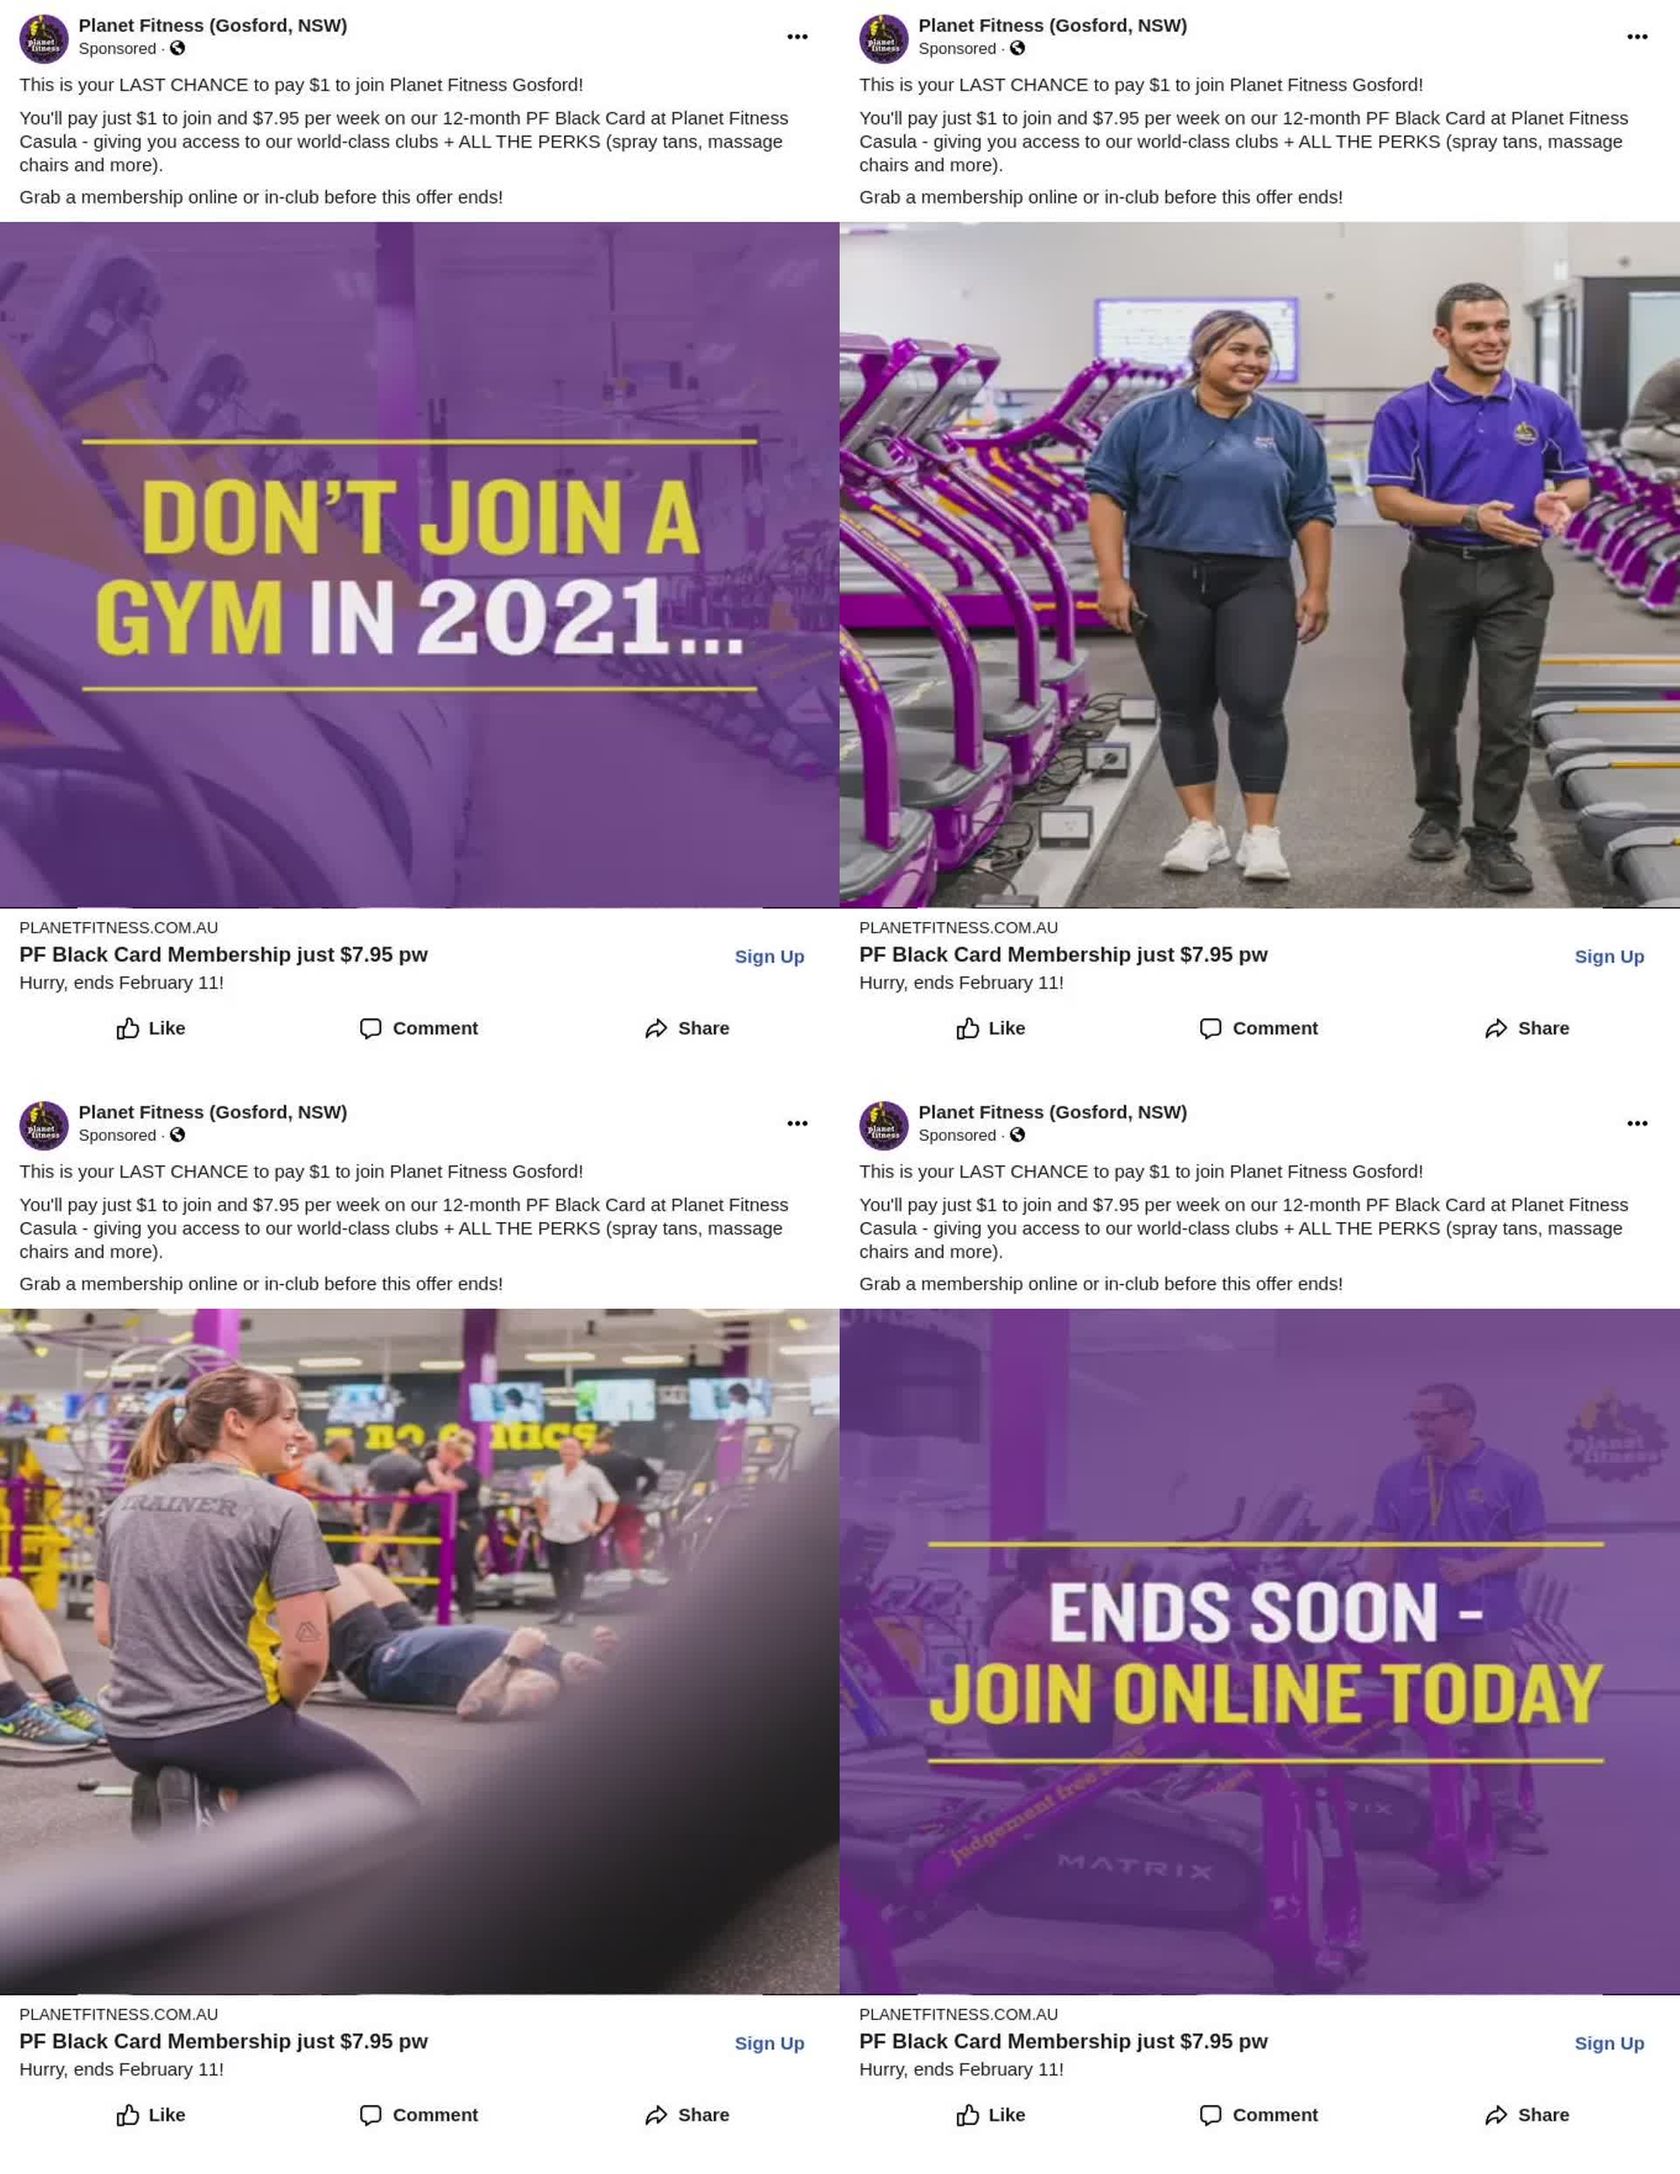 5 Day Planet Fitness Deals 2021 for Push Pull Legs